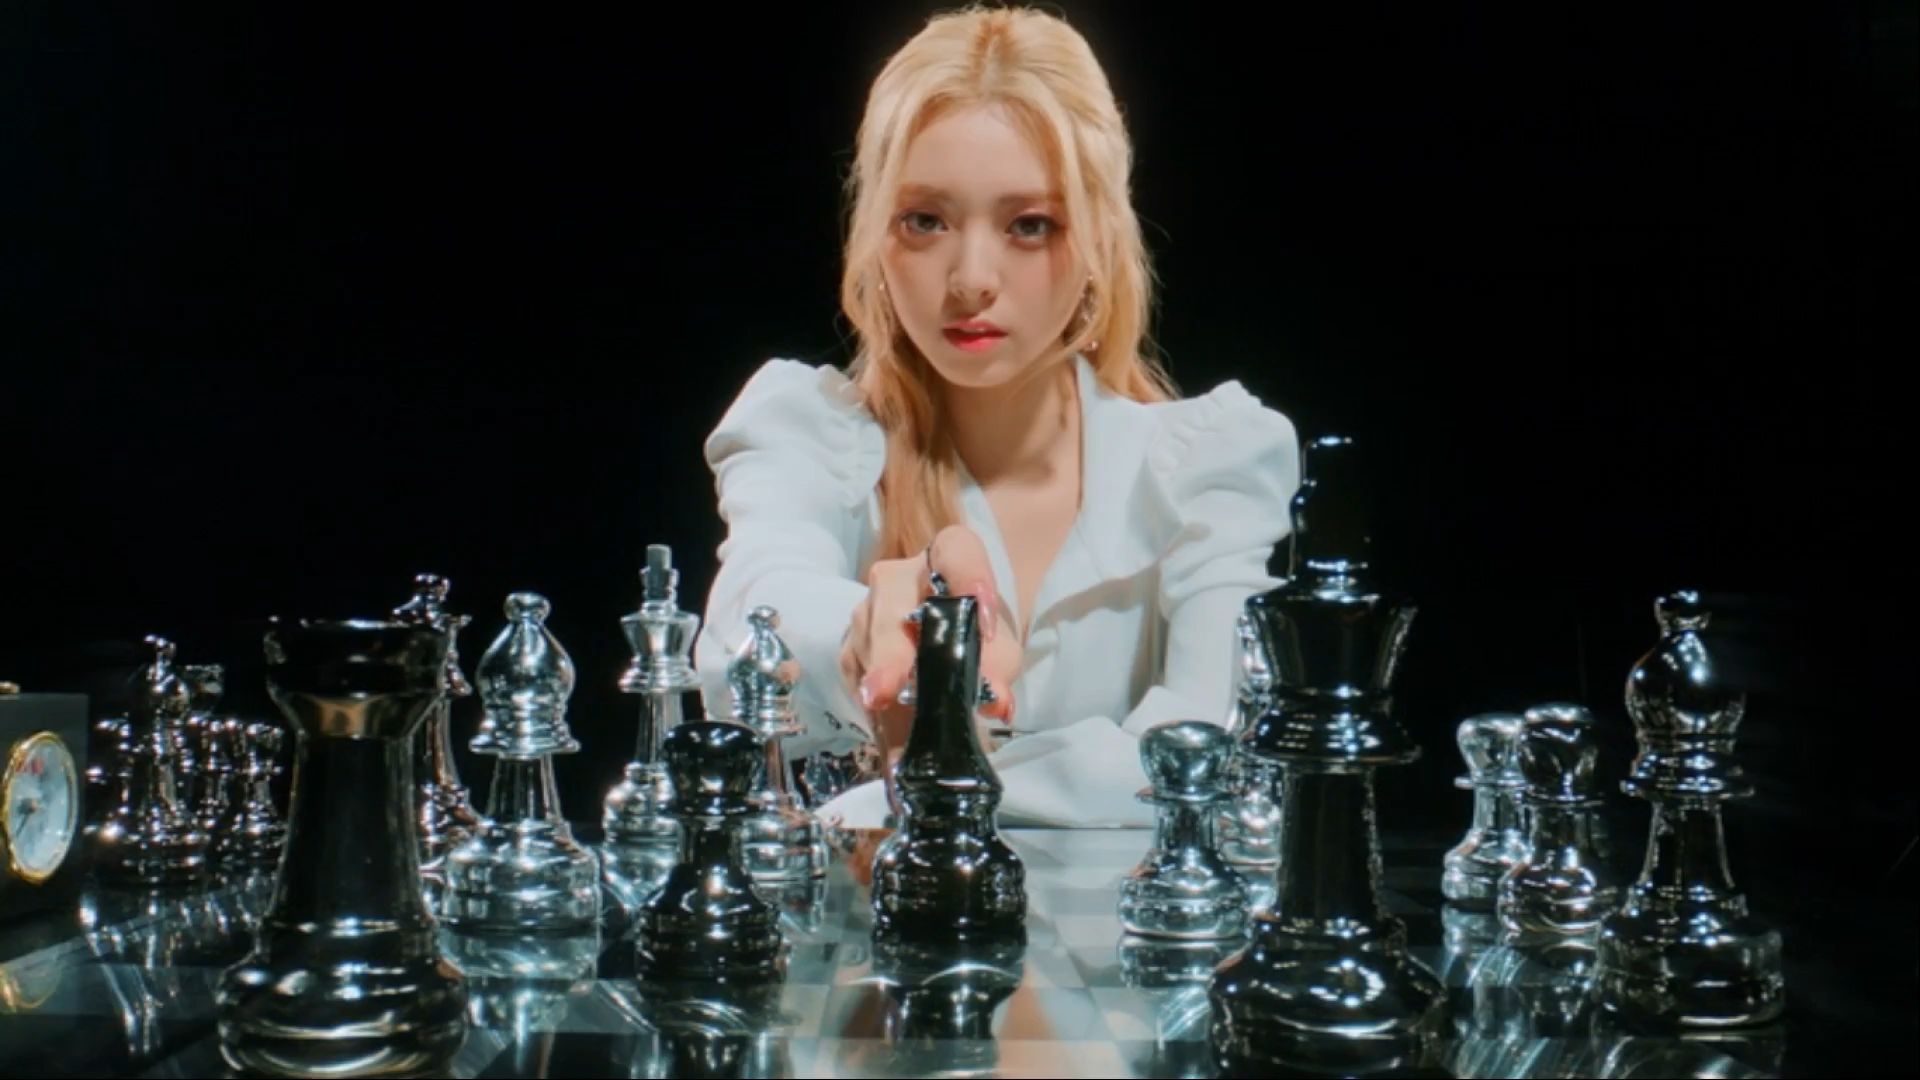 Watch: ITZY unleashes their chic personas for CHECKMATE comeback